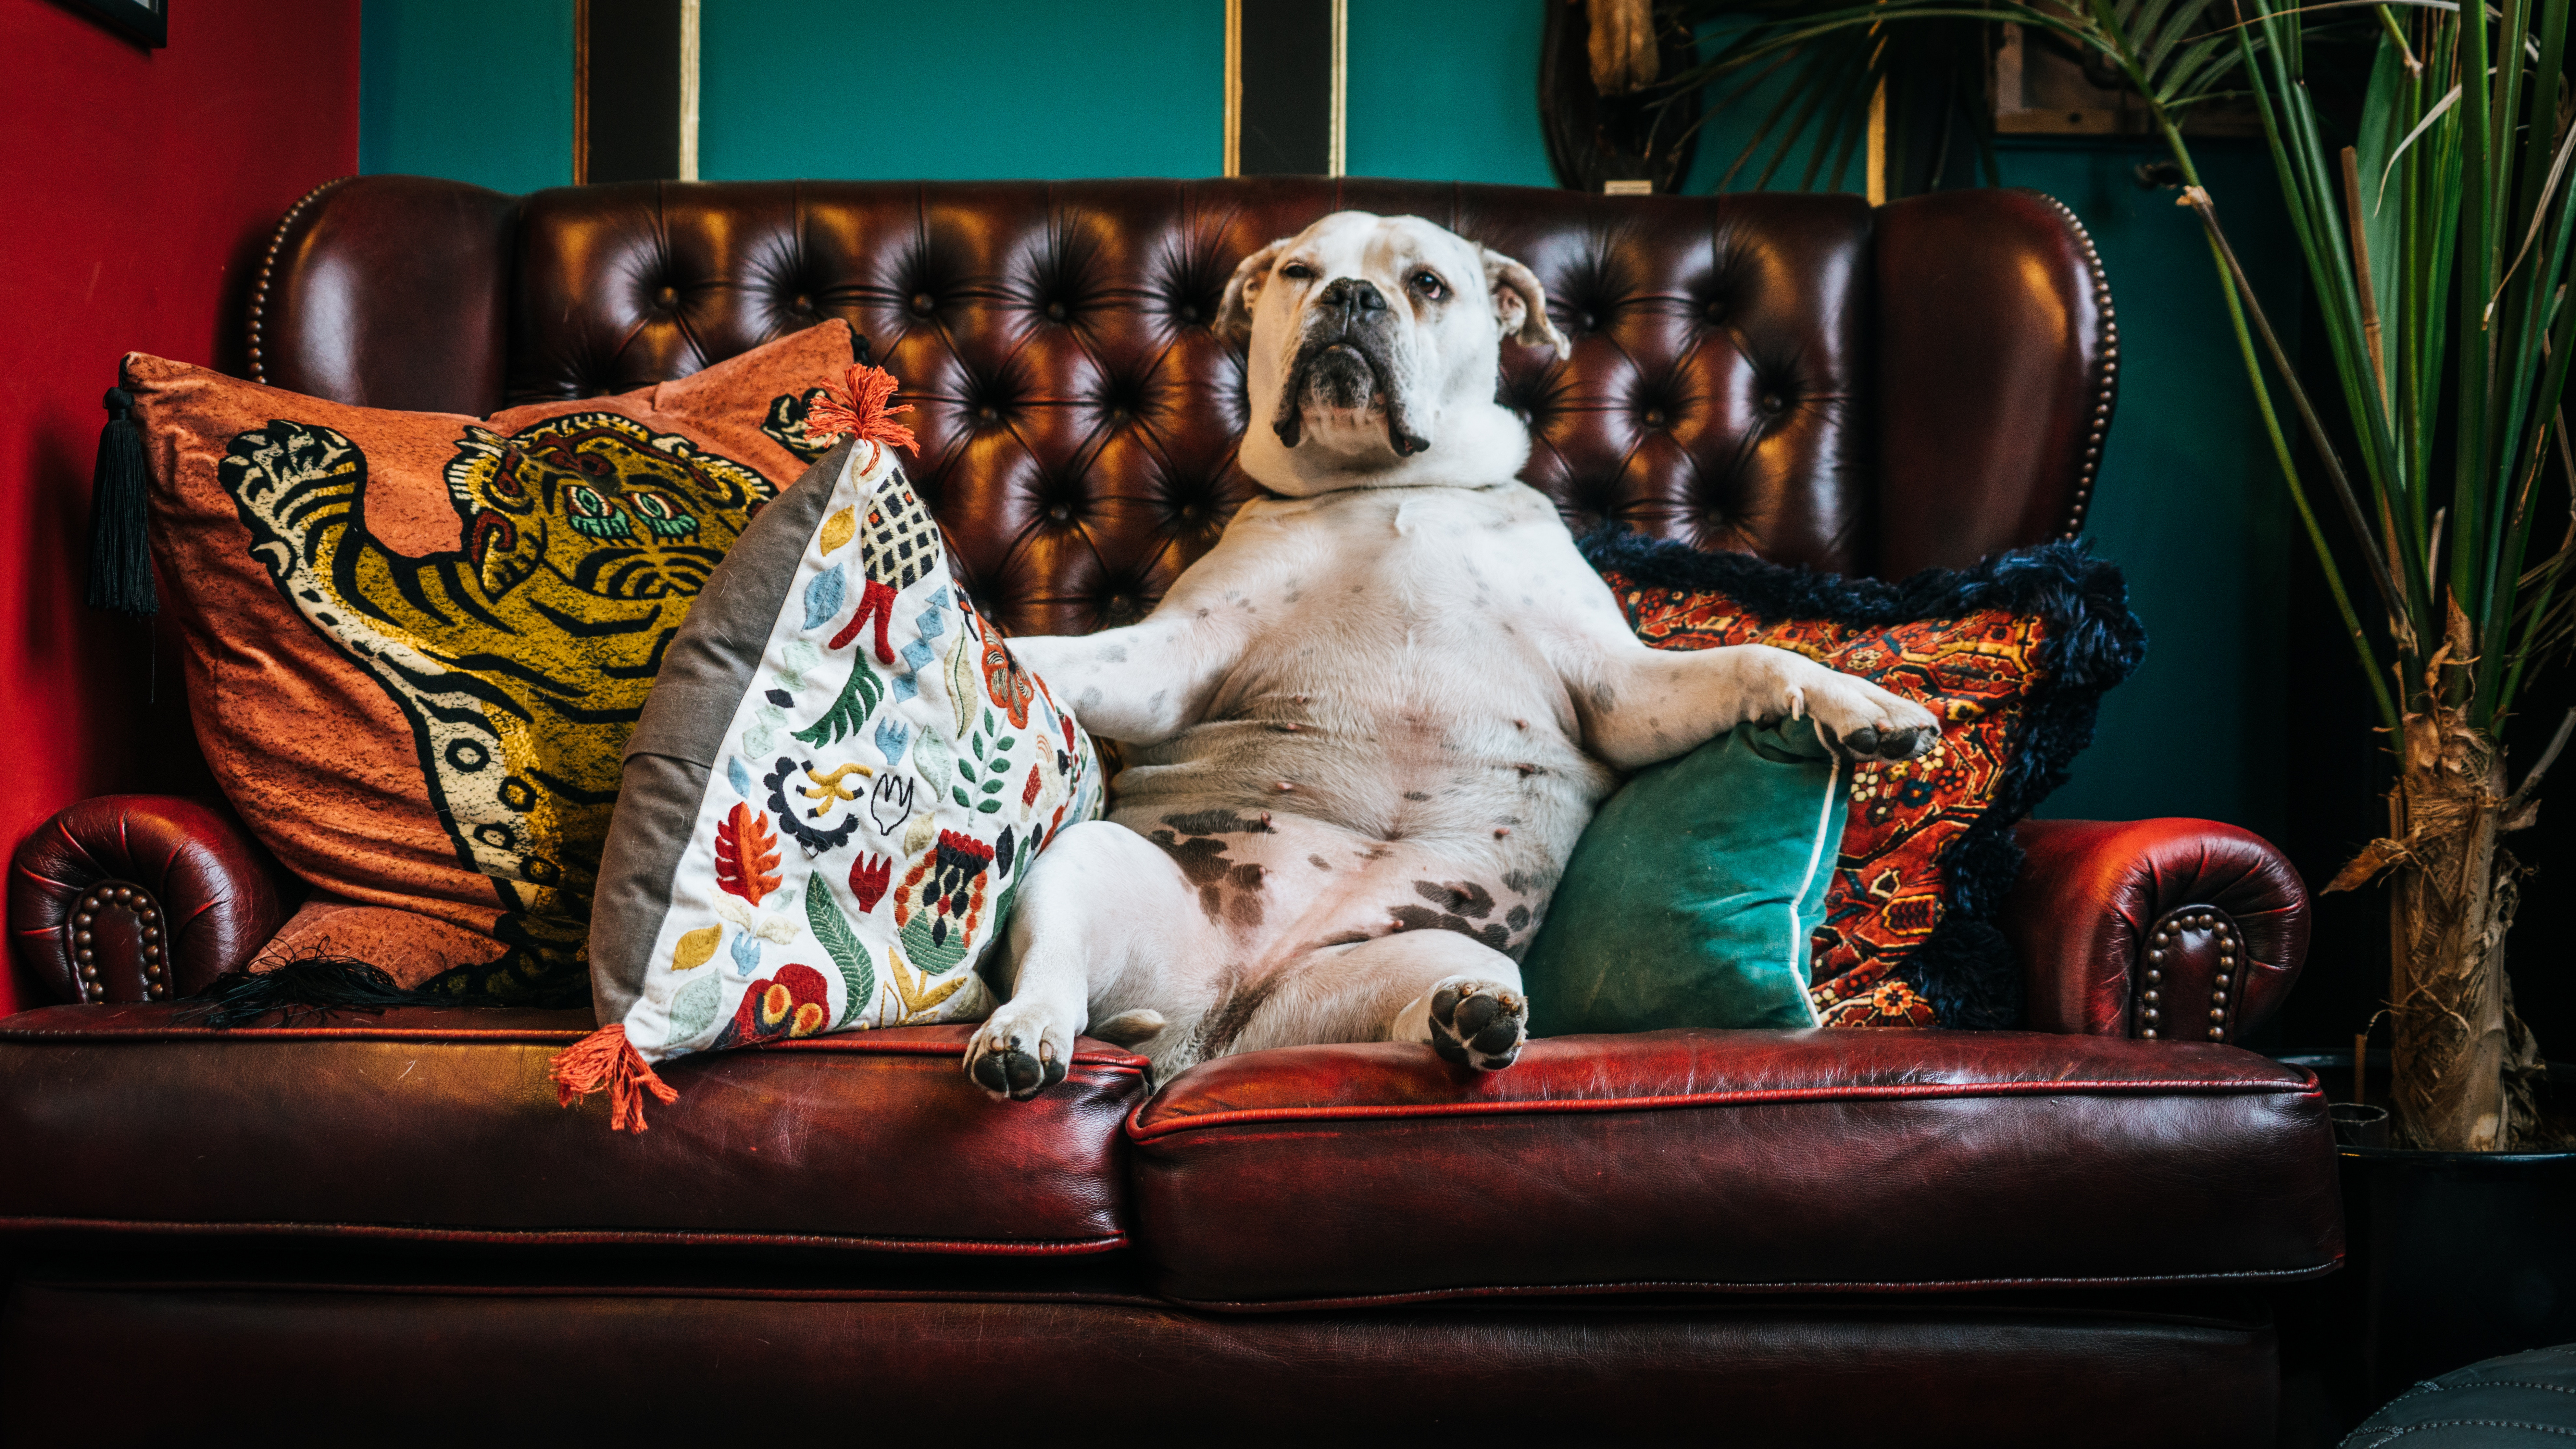 White and Black Short Coated Dog on Red and White Floral Throw Pillow on Red Sofa. Wallpaper in 7680x4320 Resolution